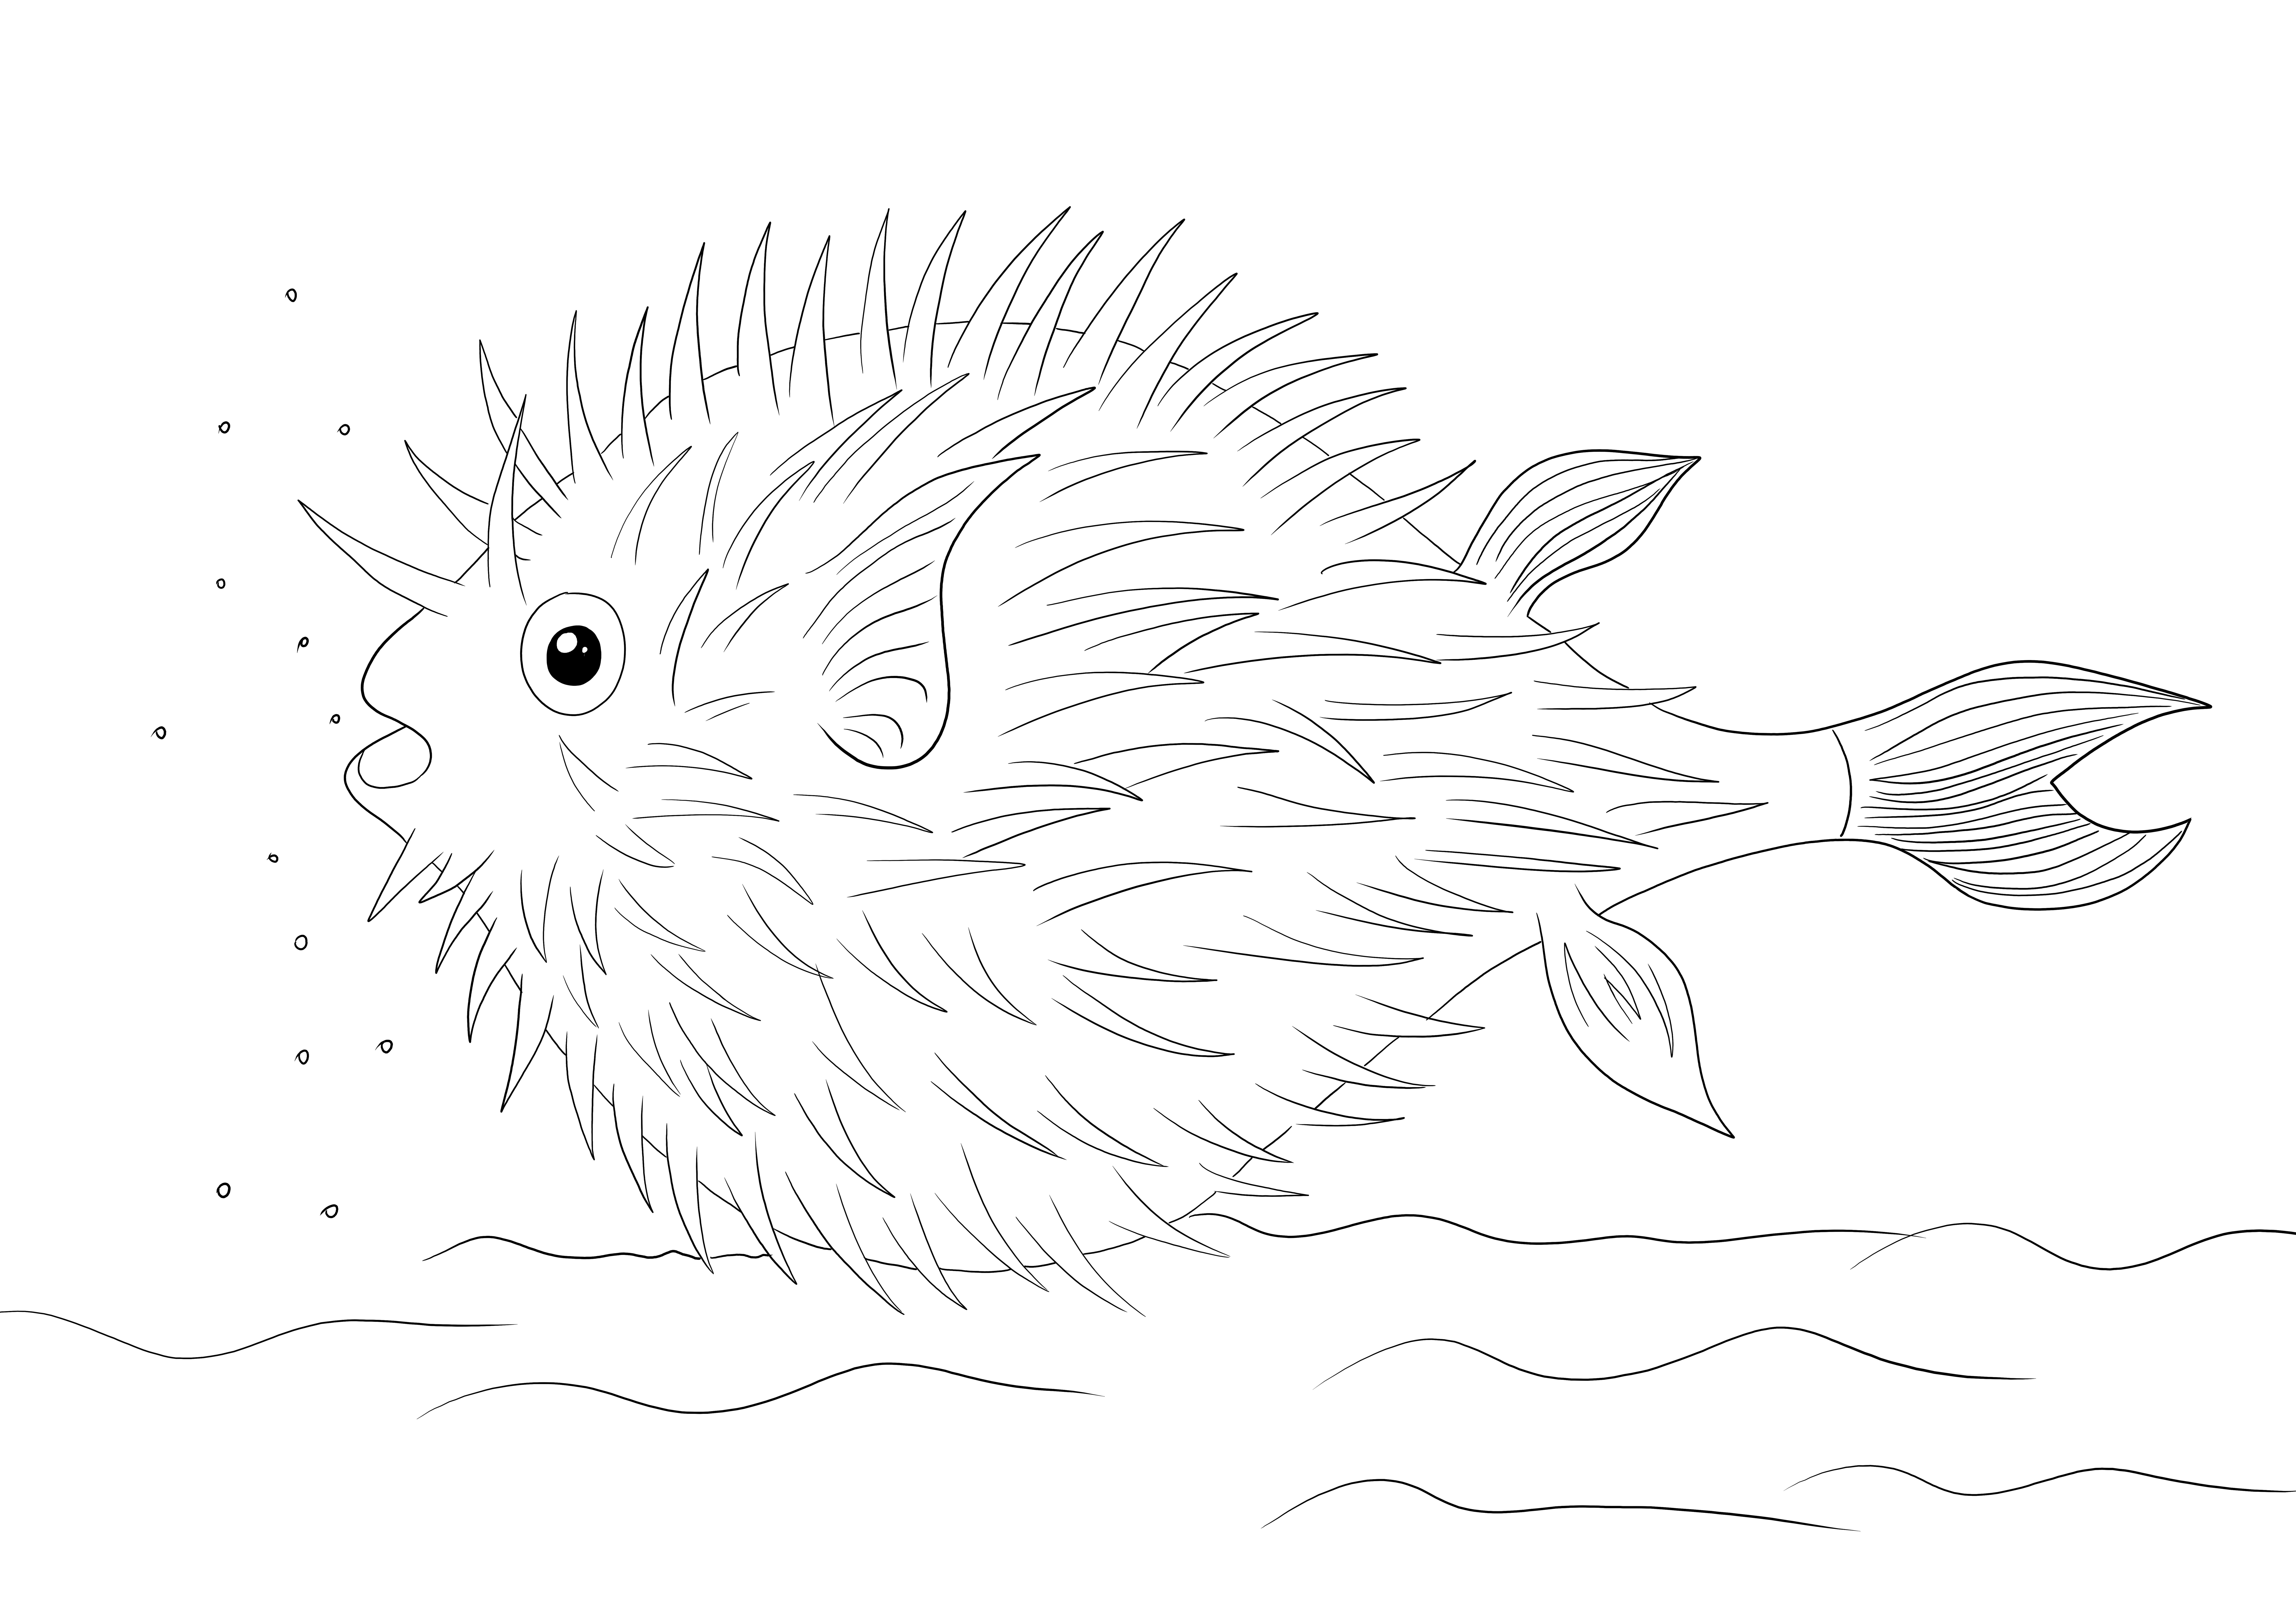 Puffer Fish to print and color or save for later coloring too